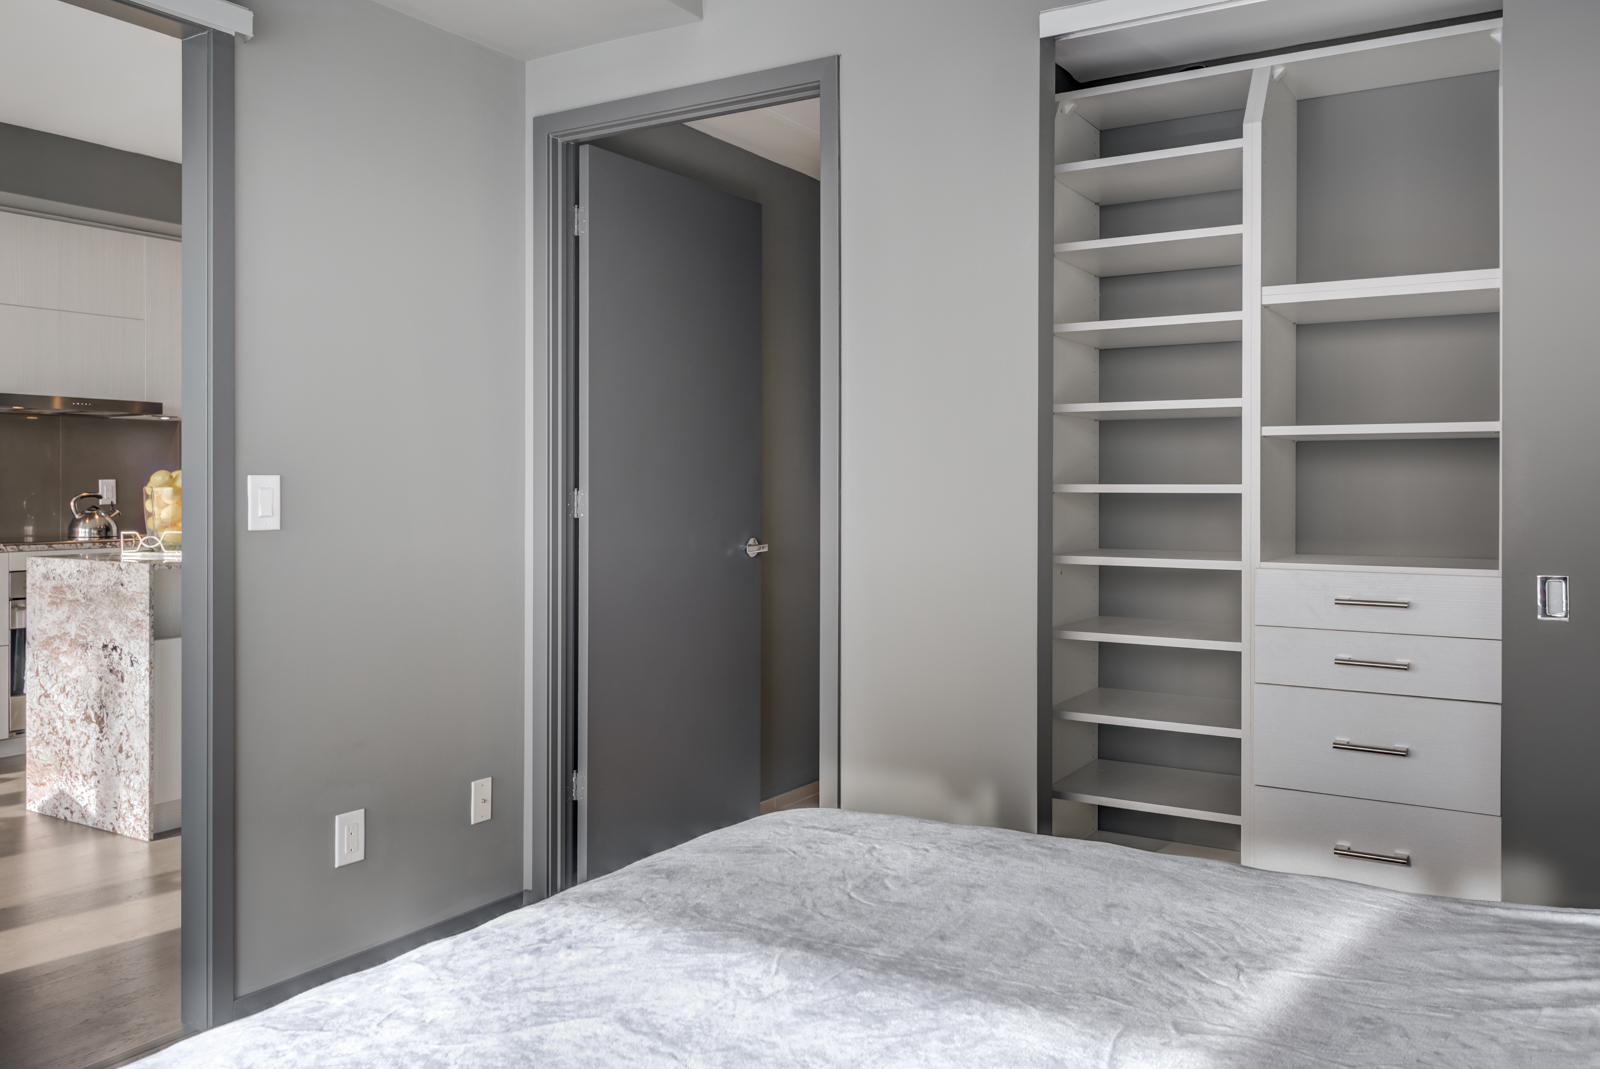 Open closet doors with empty shelves and drawers in bedroom of Unit 4305.